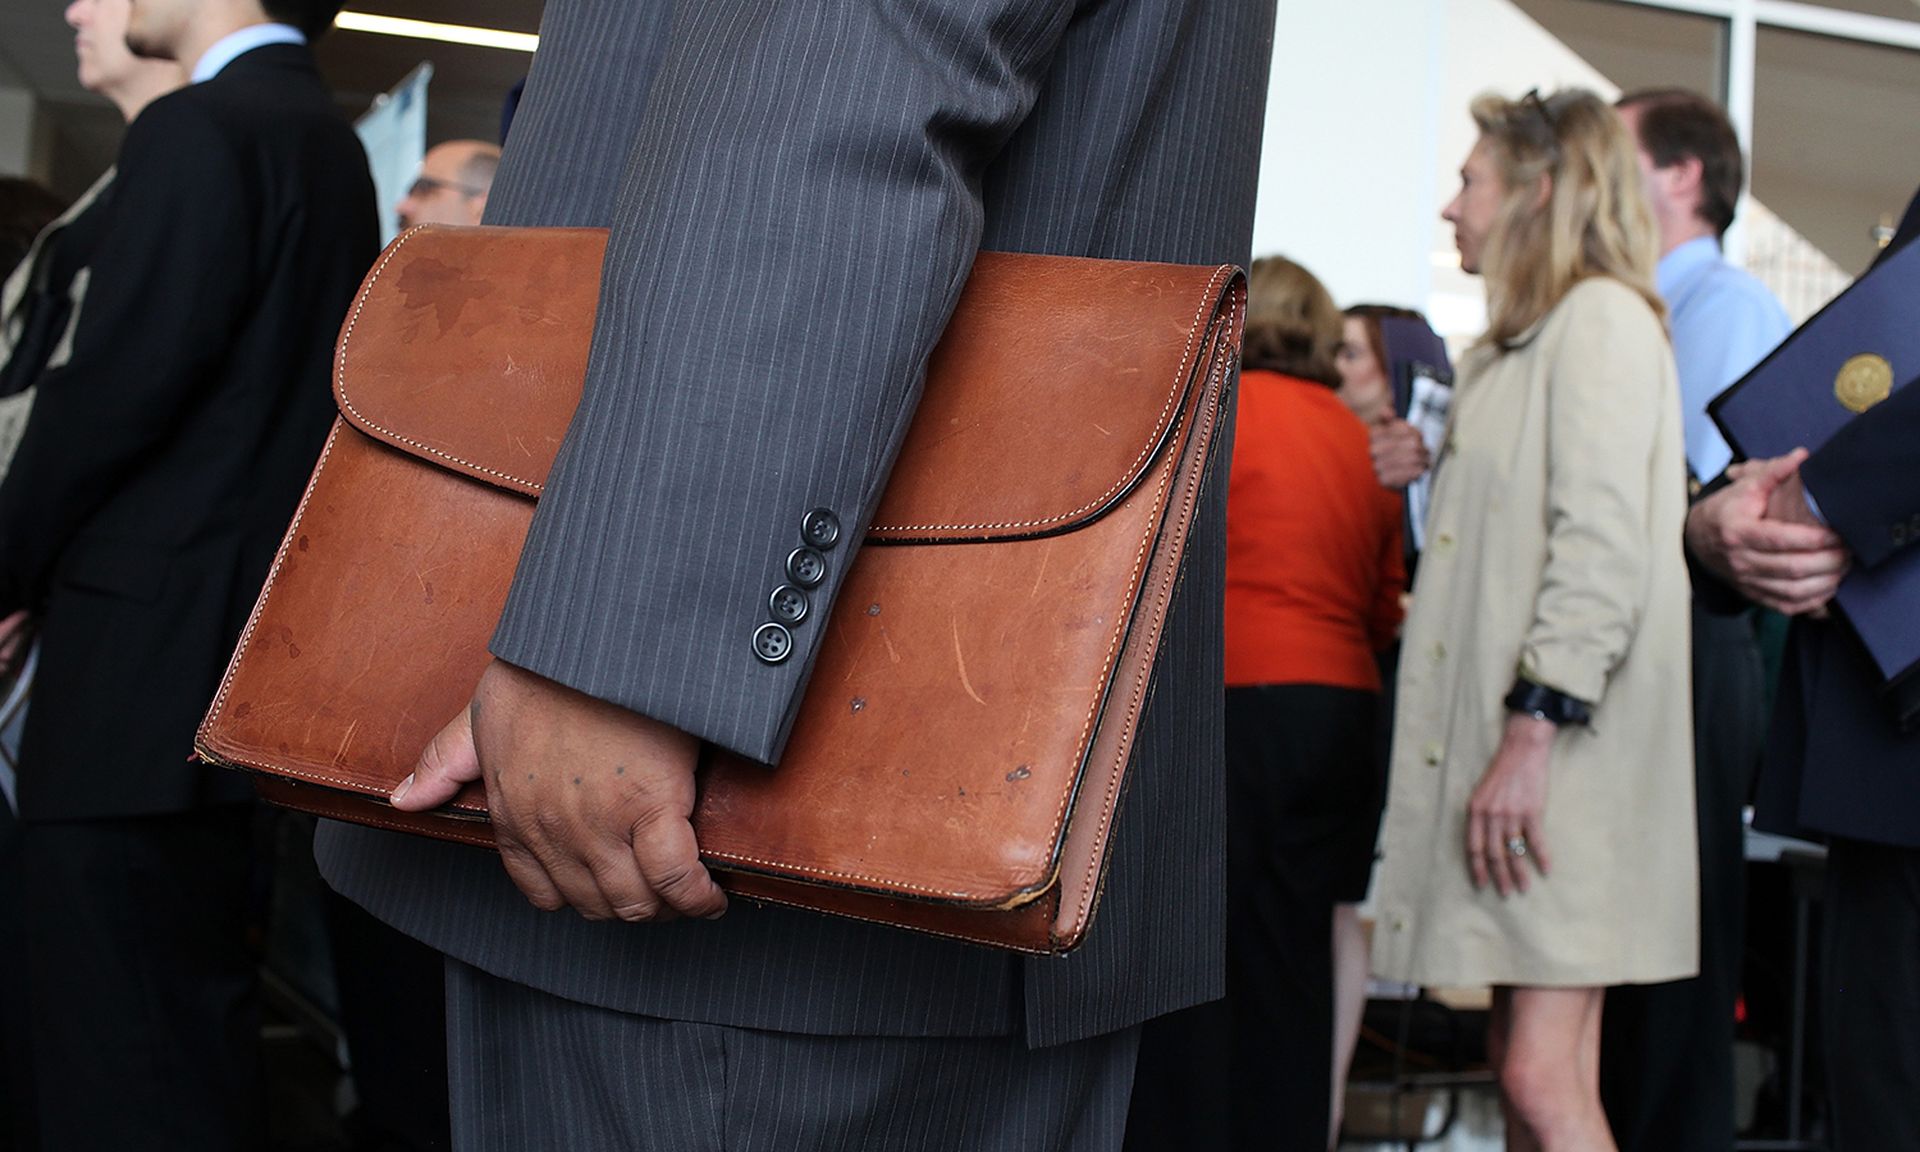 A job seeker holds a briefcase as he waits in line.